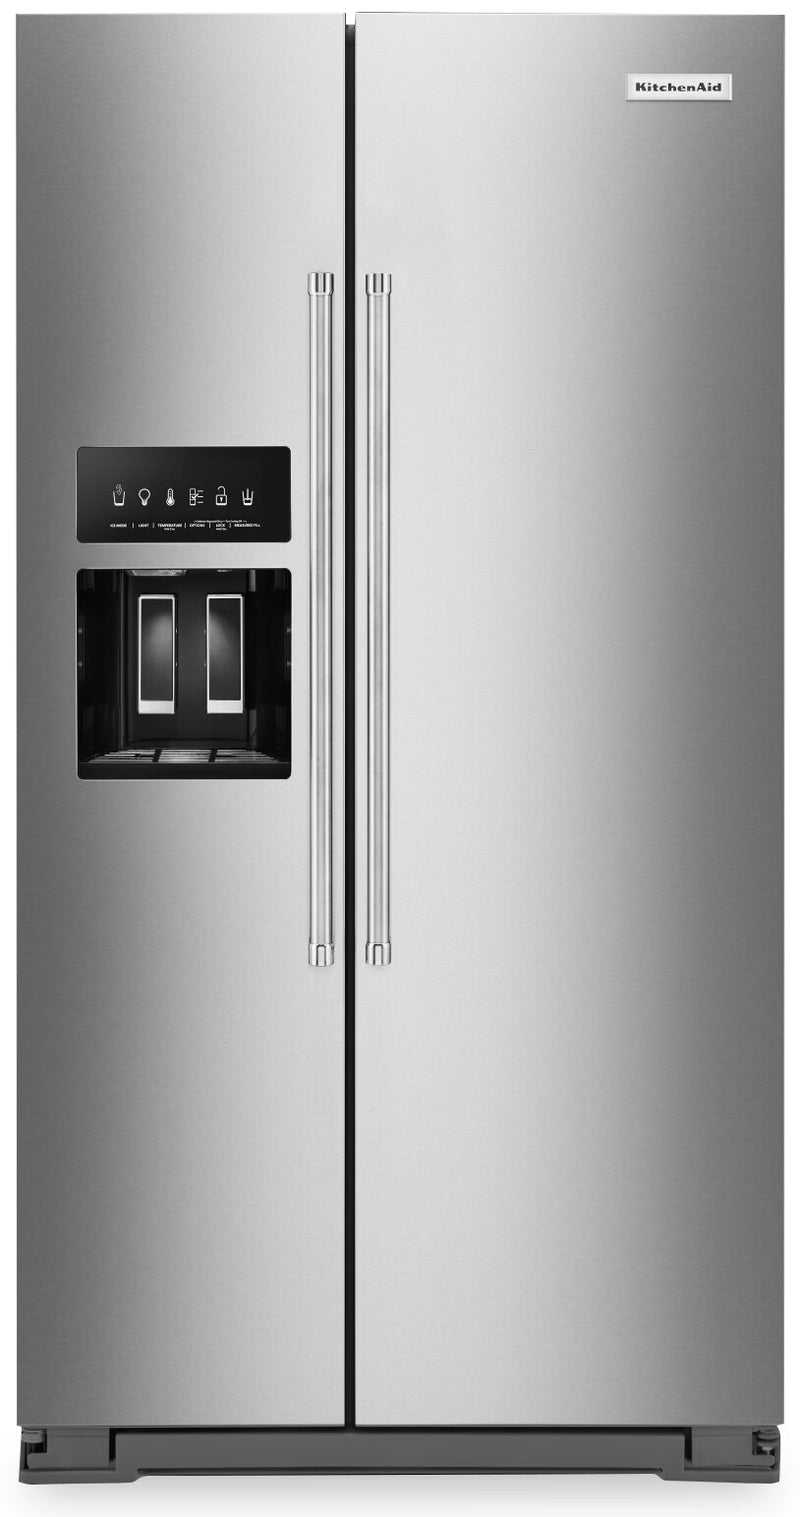 KitchenAid 24.8 Cu. Ft. Side-by-Side Refrigerator - KRSF705HPS - Refrigerator in Stainless Steel with PrintShield™ Finish